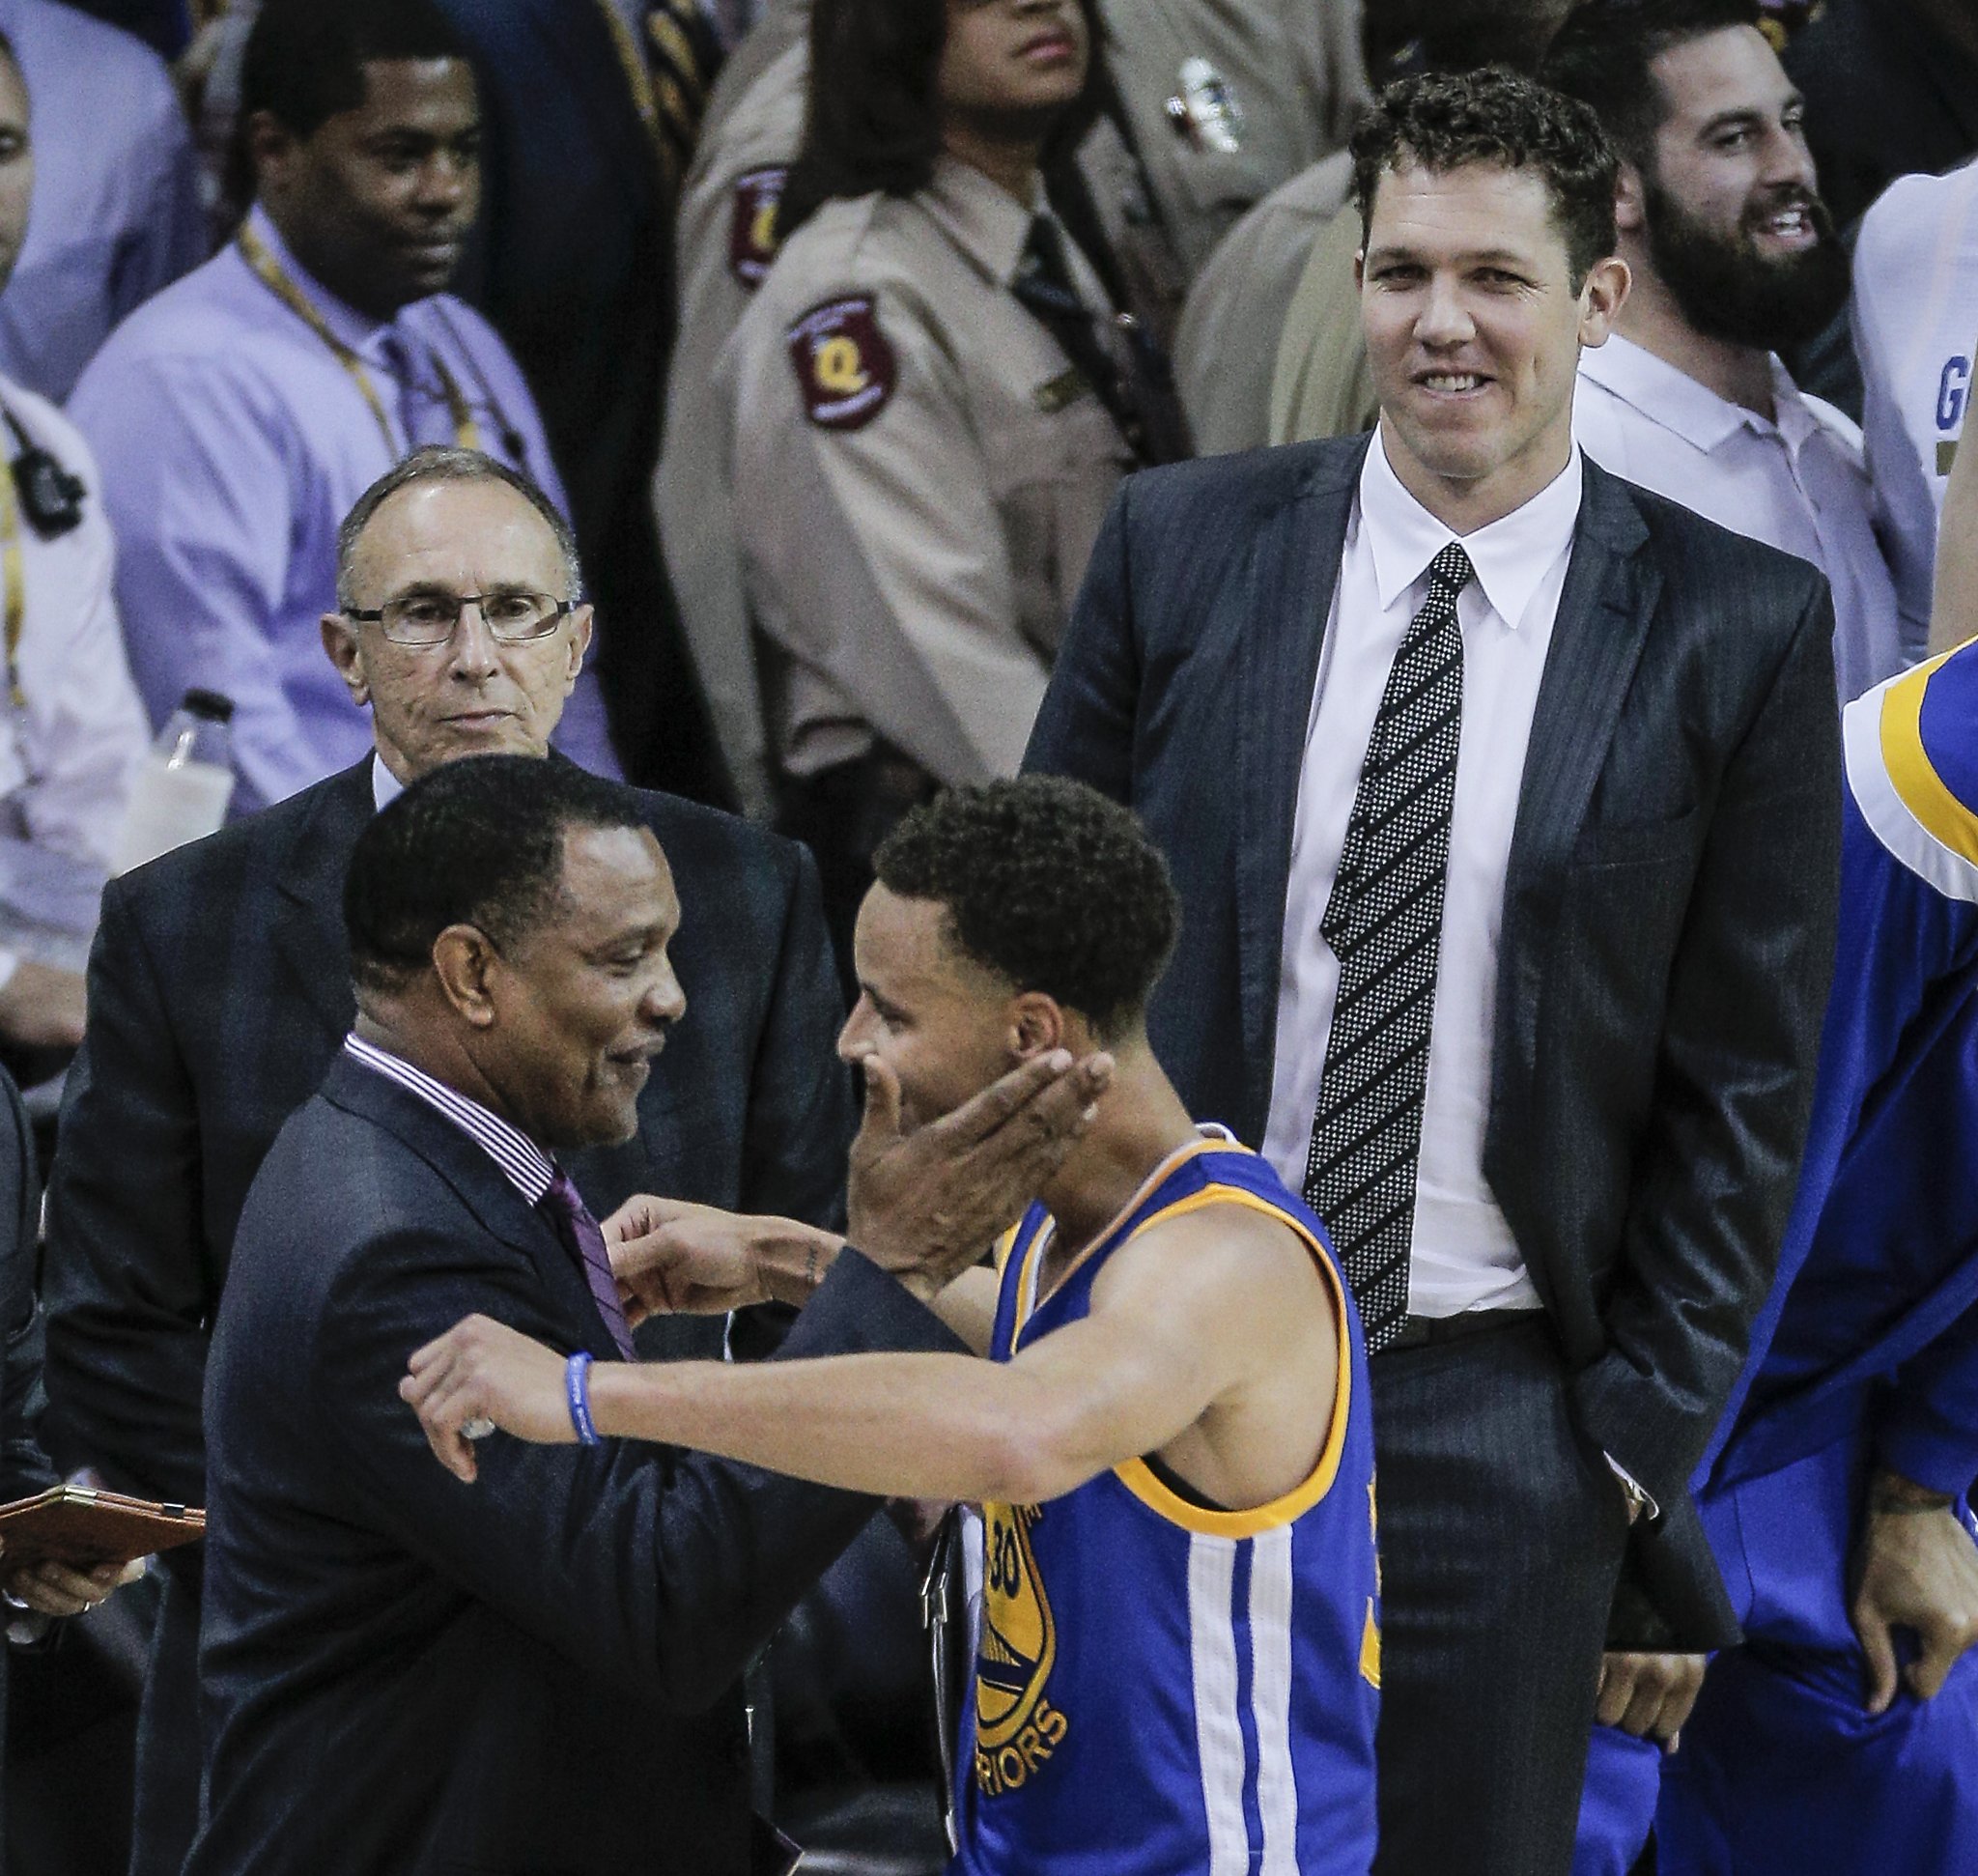 Warriors assistant coach Alvin Gentry's parting shot was a dunk